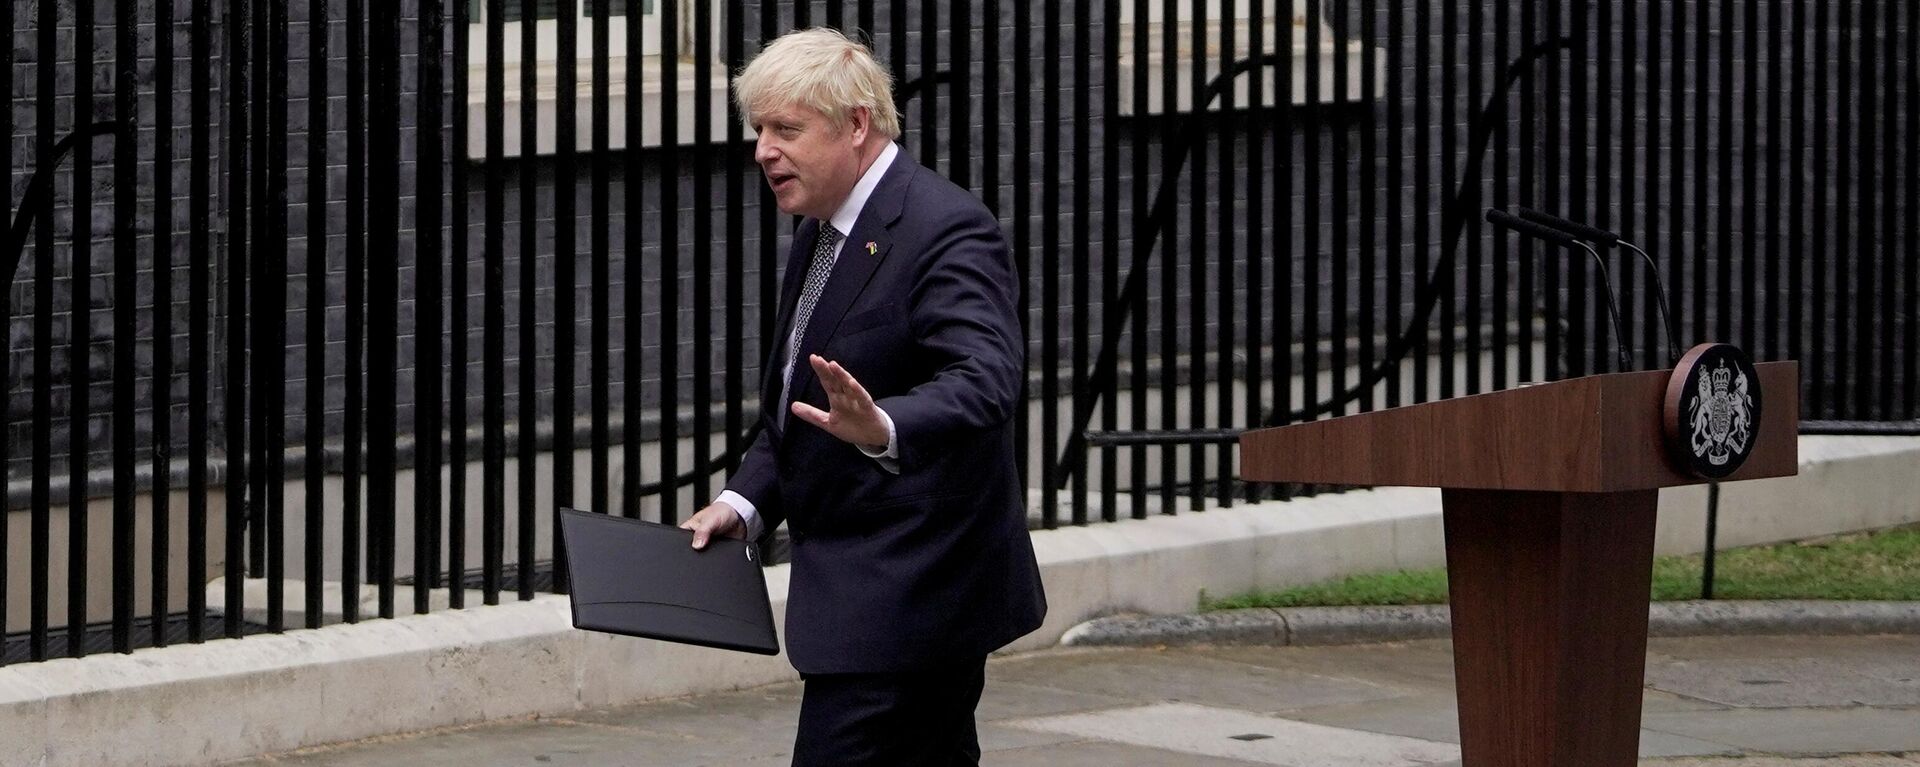 Britain's Prime Minister Boris Johnson leaves after making a statement in front of 10 Downing Street in central London on July 7, 2022 - Sputnik International, 1920, 23.07.2022